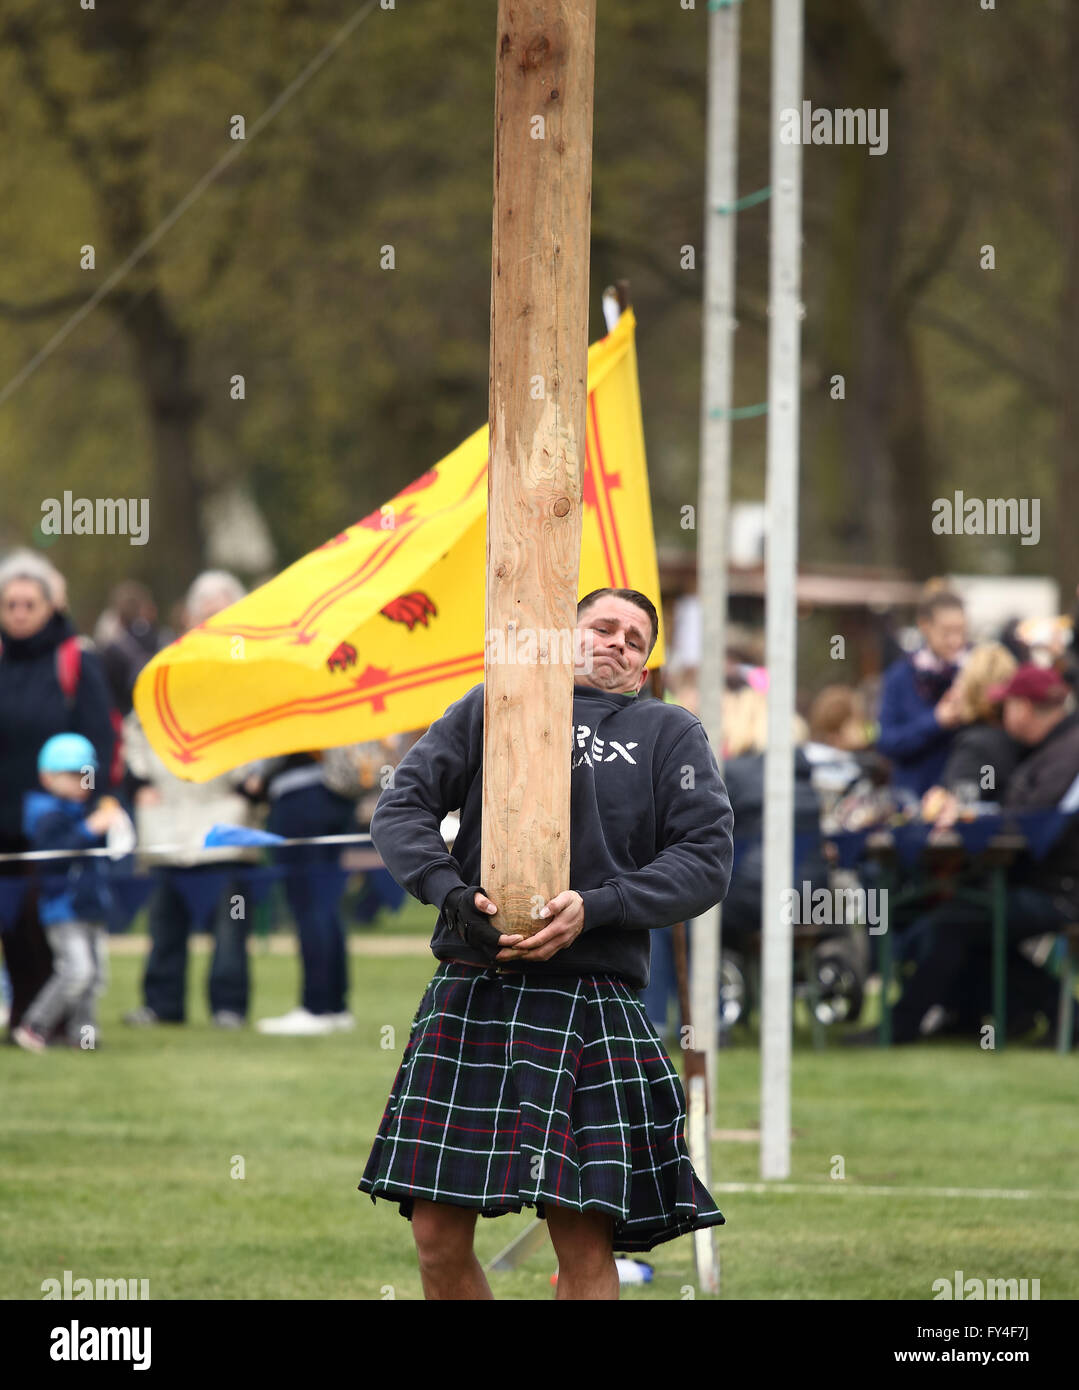 Kilted competitor about to toss the caber with Royal Standard of Scotland in the background. Stock Photo